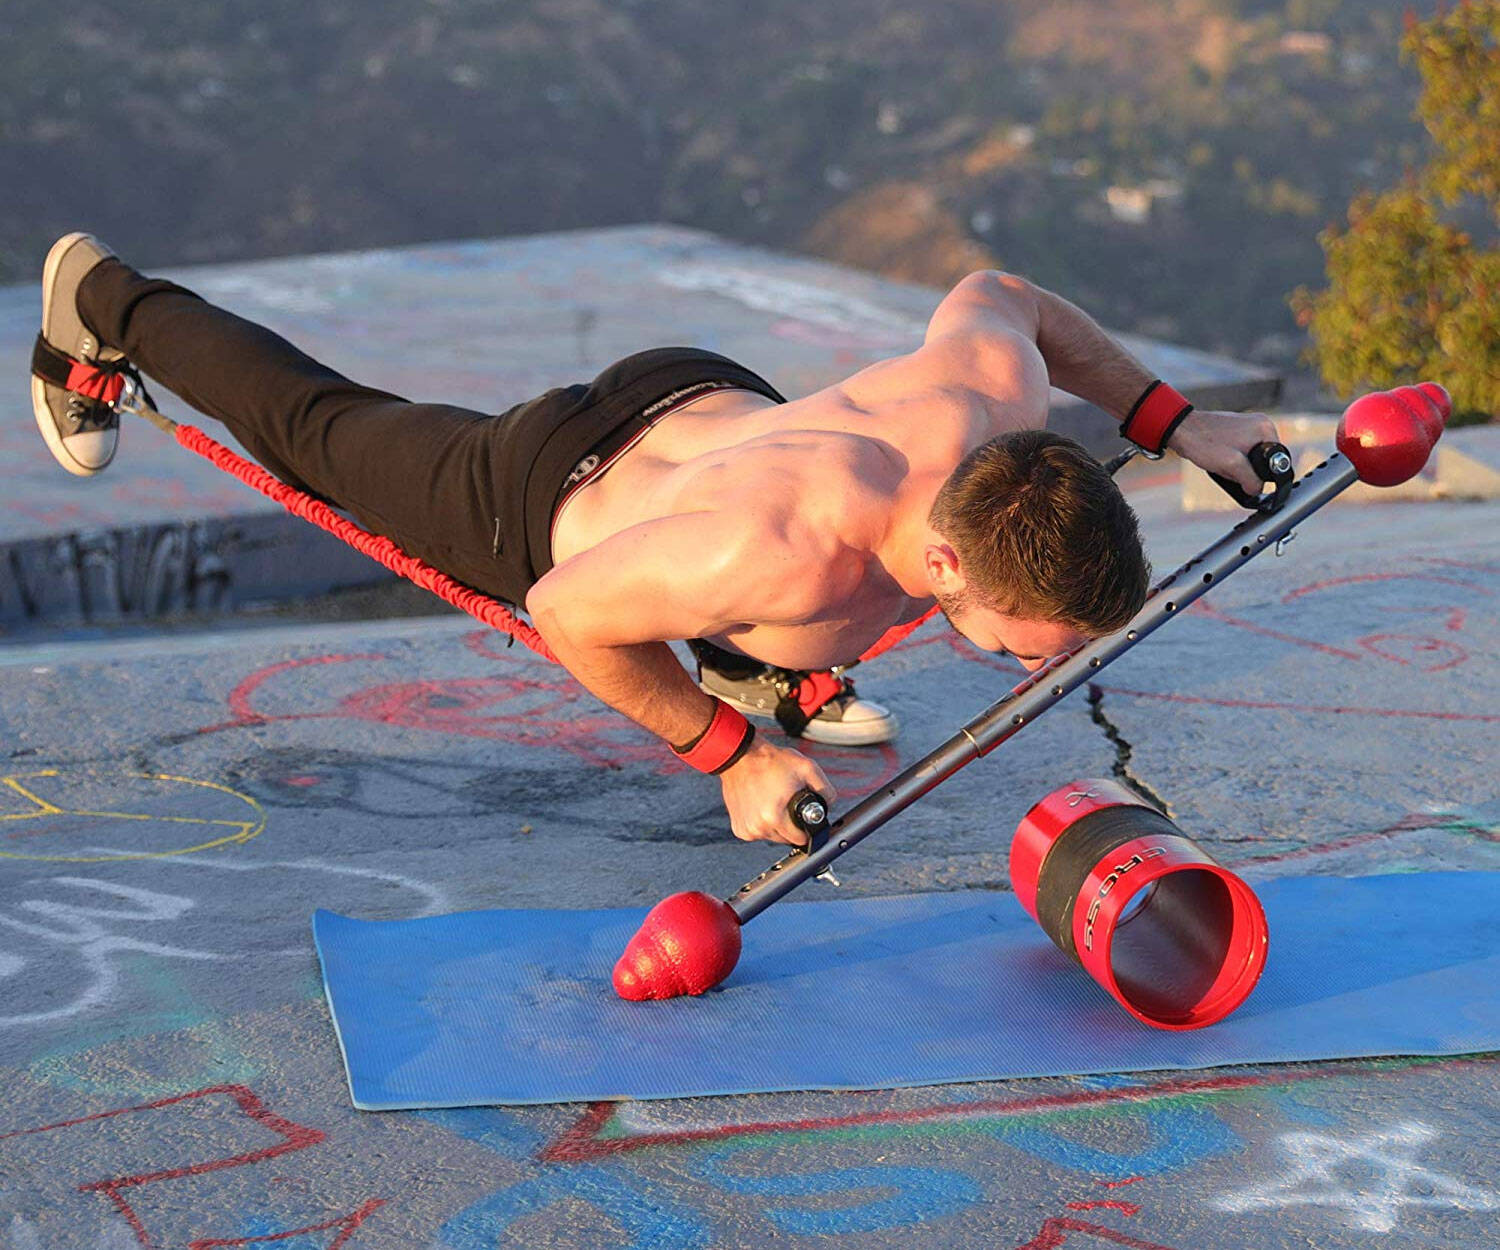 EdgeCross x Home & Portable Gym - //coolthings.us